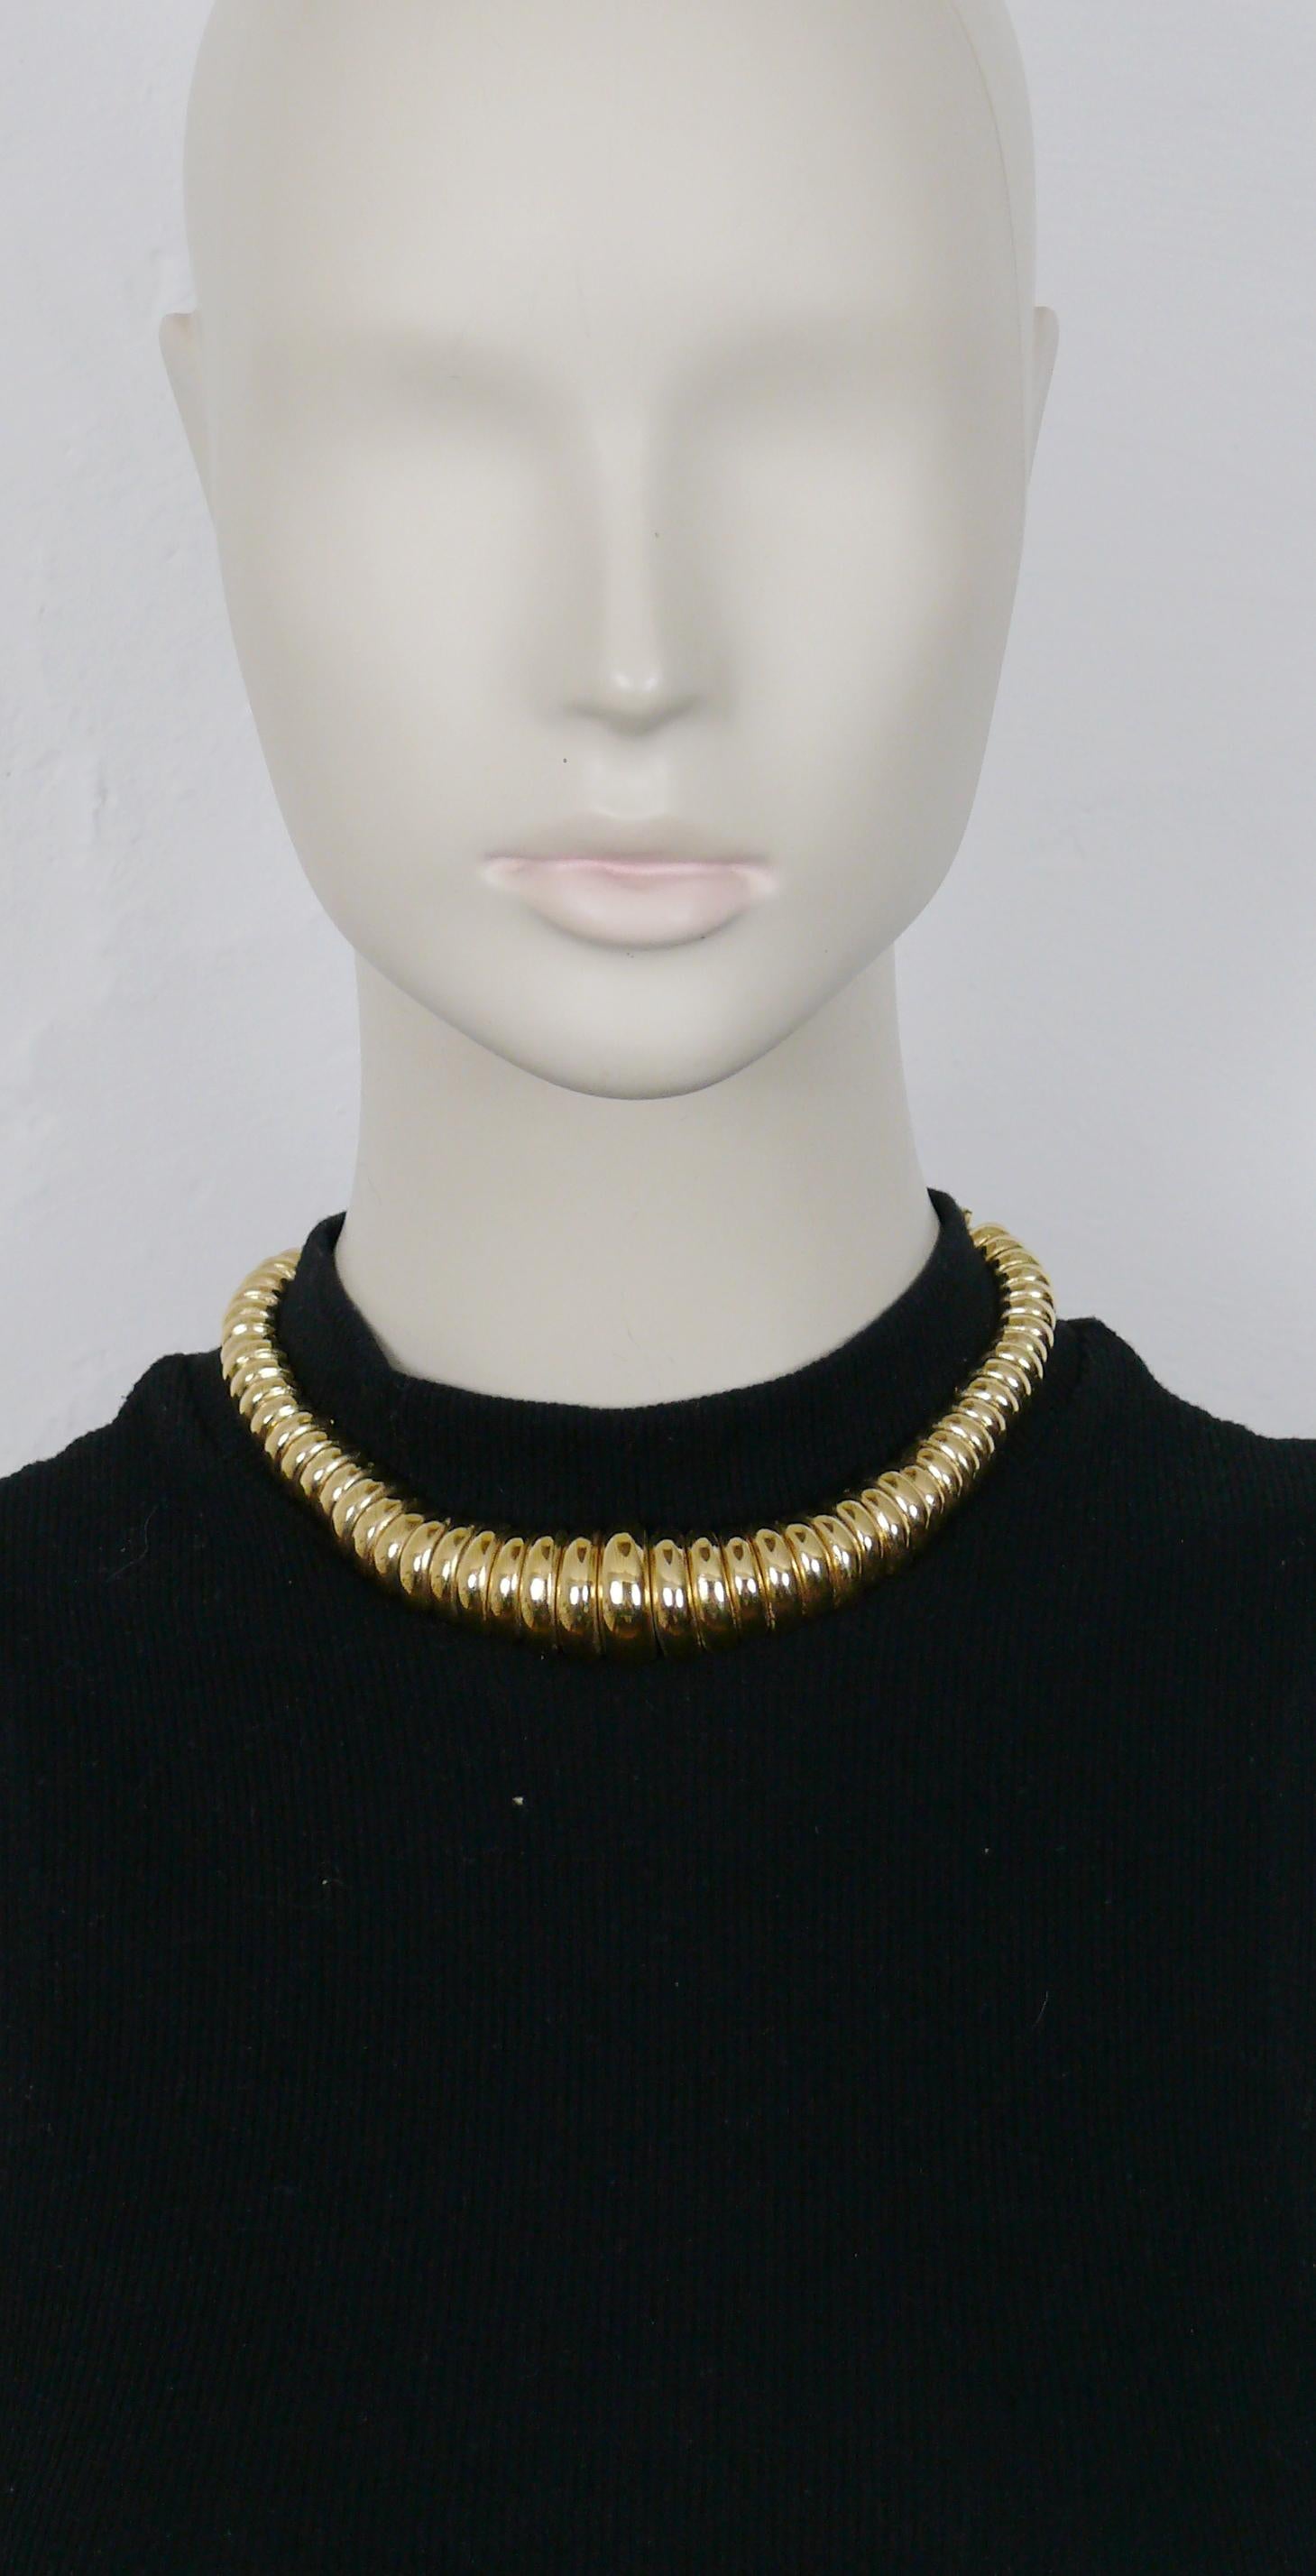 YVES SAINT LAURENT vintage gold toned articulated collar necklace featuring a gadroon design.

Hook closure with extension chain.

Embossed YSL Made in France.

Indicative measurements : max. circumference approx. 42.40 cm (16.69 inches) / max.